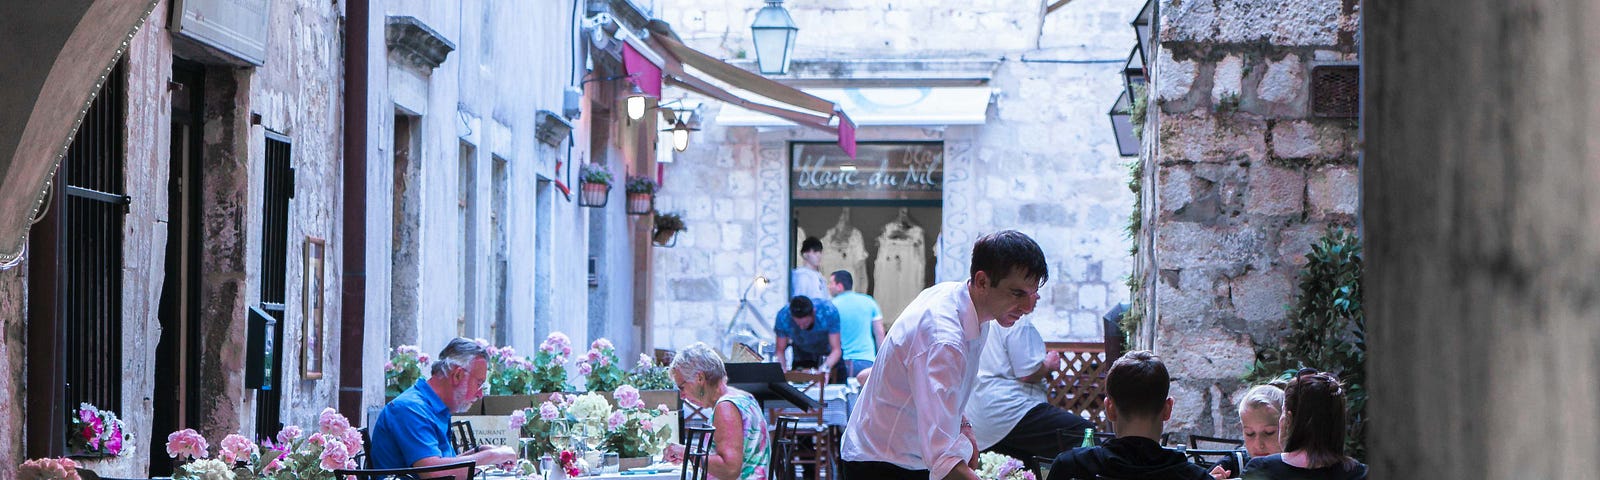 Tables with tablecloths and flowers lining coblestone street under a portico, waiter at one table with patrons.